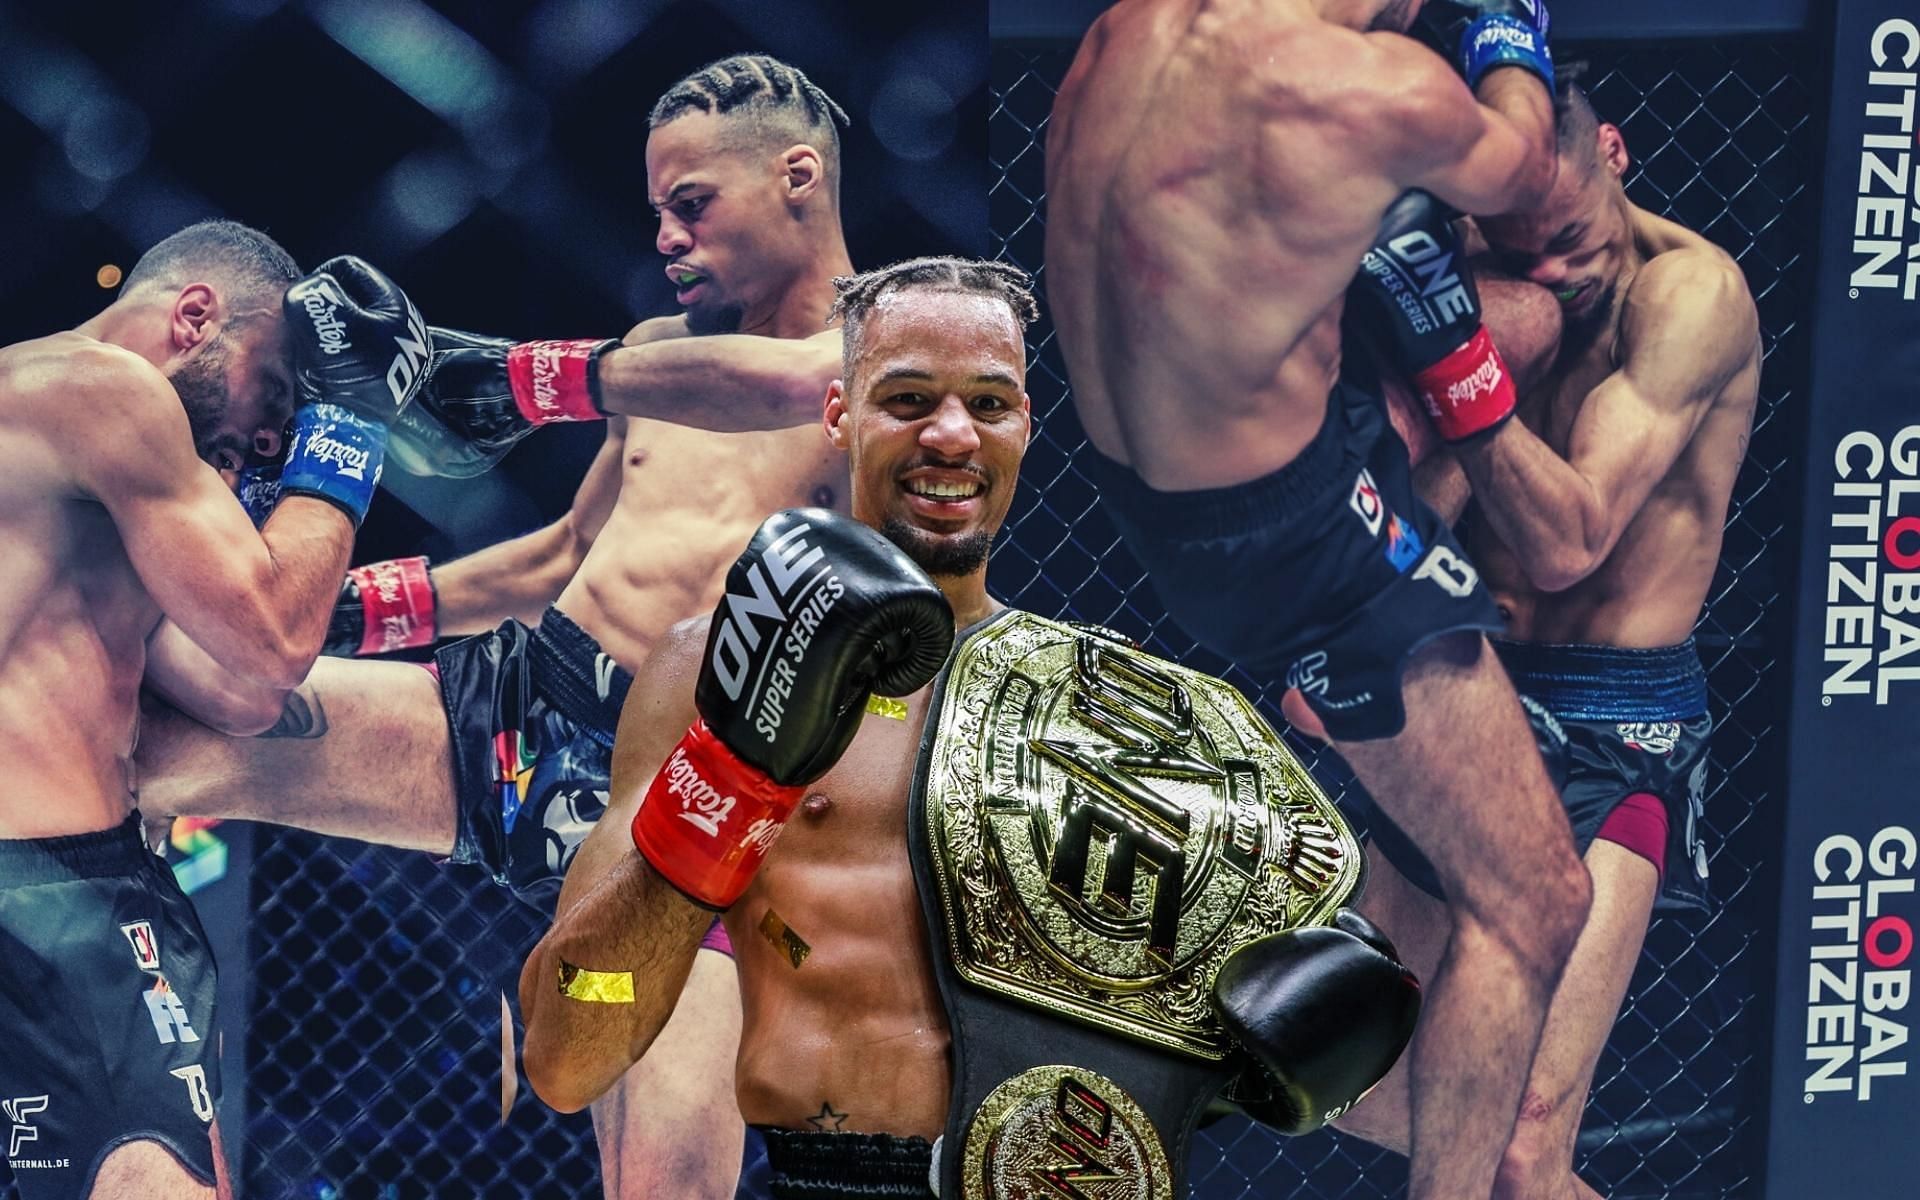 ONE Championship lightweight kickboxing champion Regian Eersel defended his belt at ONE 156. (Images courtesy of ONE Championship)